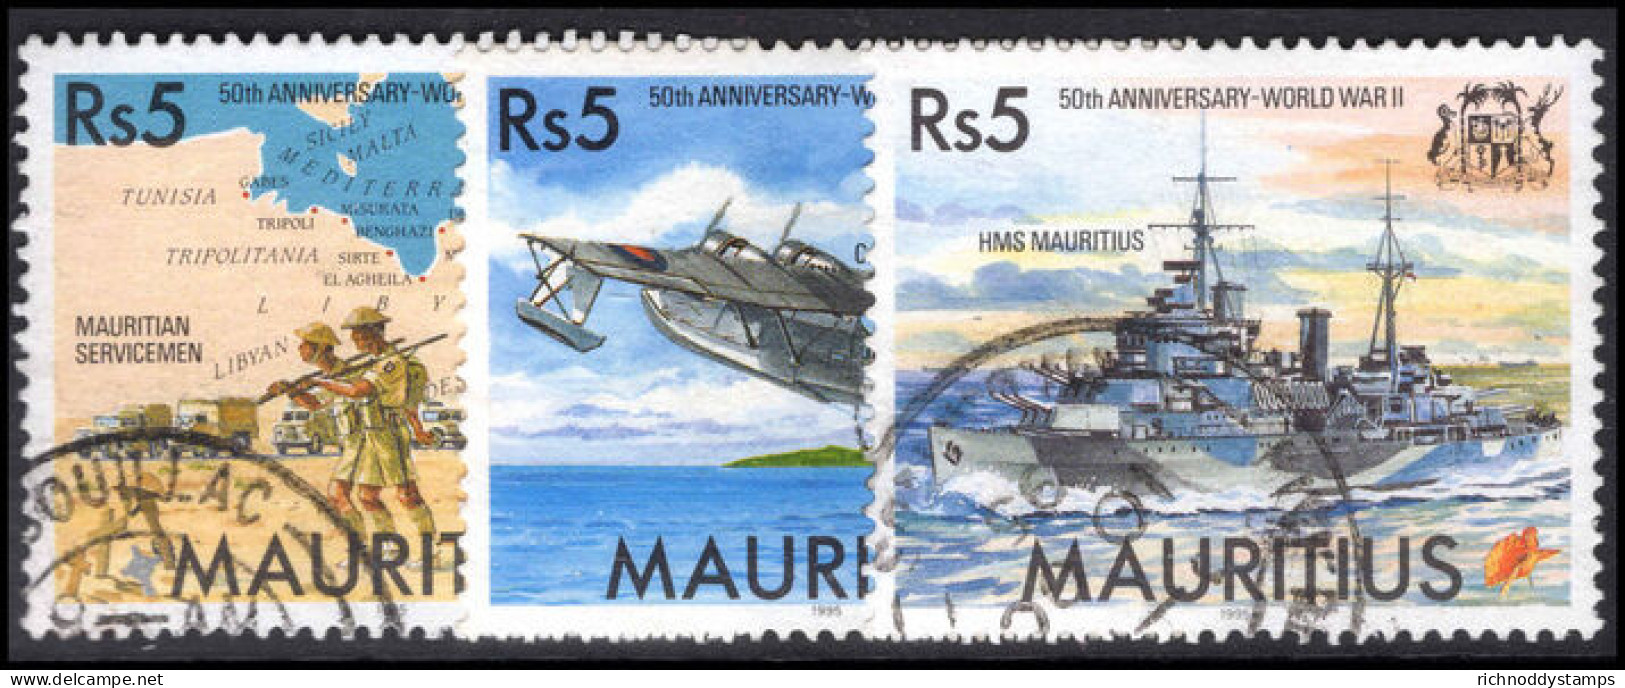 Mauritius 1995 50th Anniv Of The End Of WWII Fine Used. - Maurice (1968-...)